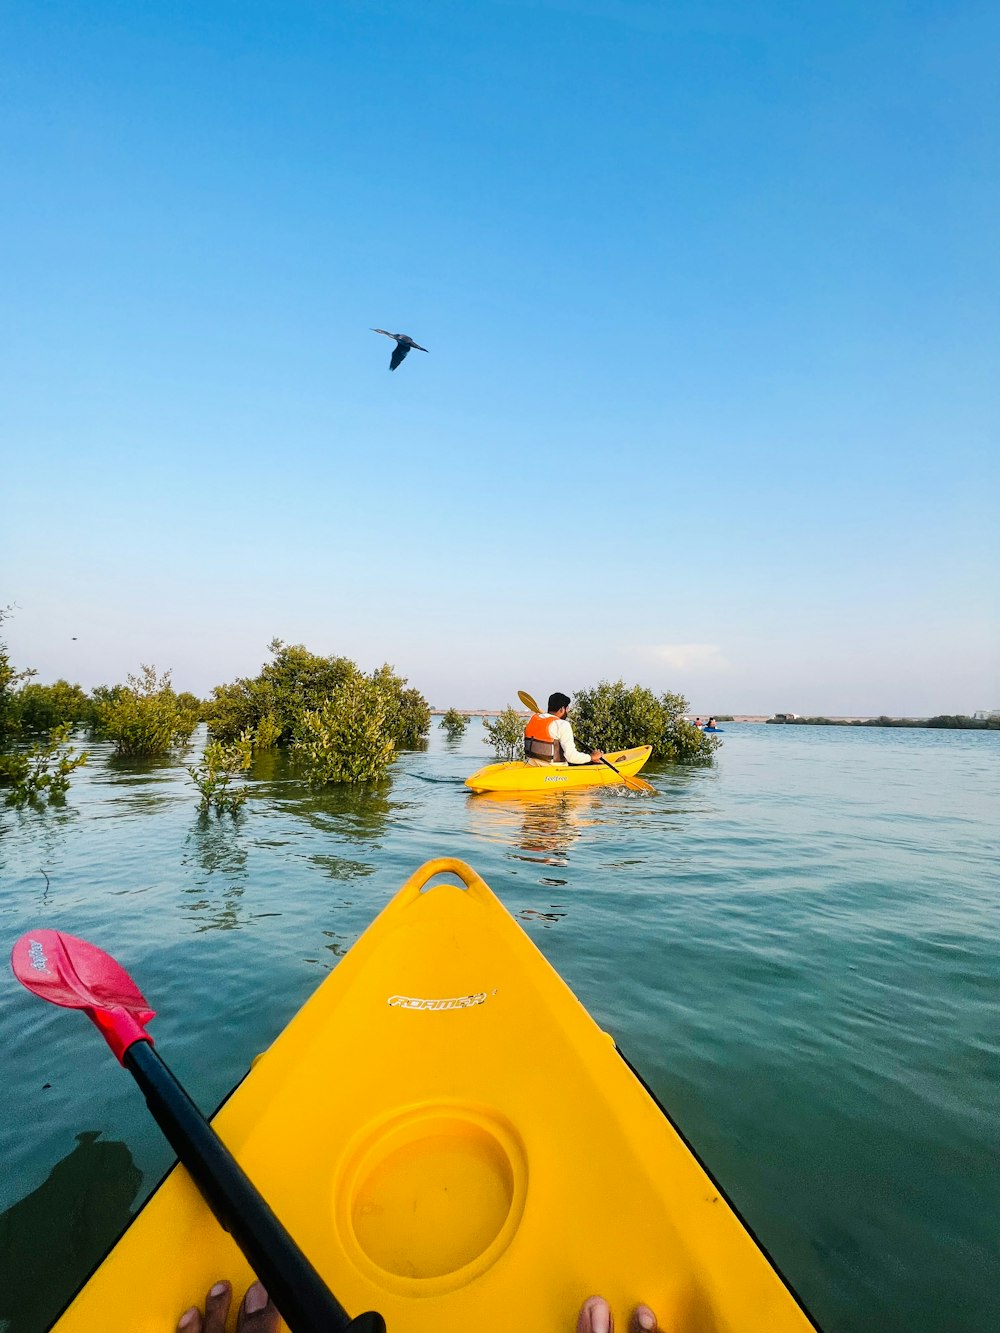 a person in a kayak in a body of water with a bird flying over it